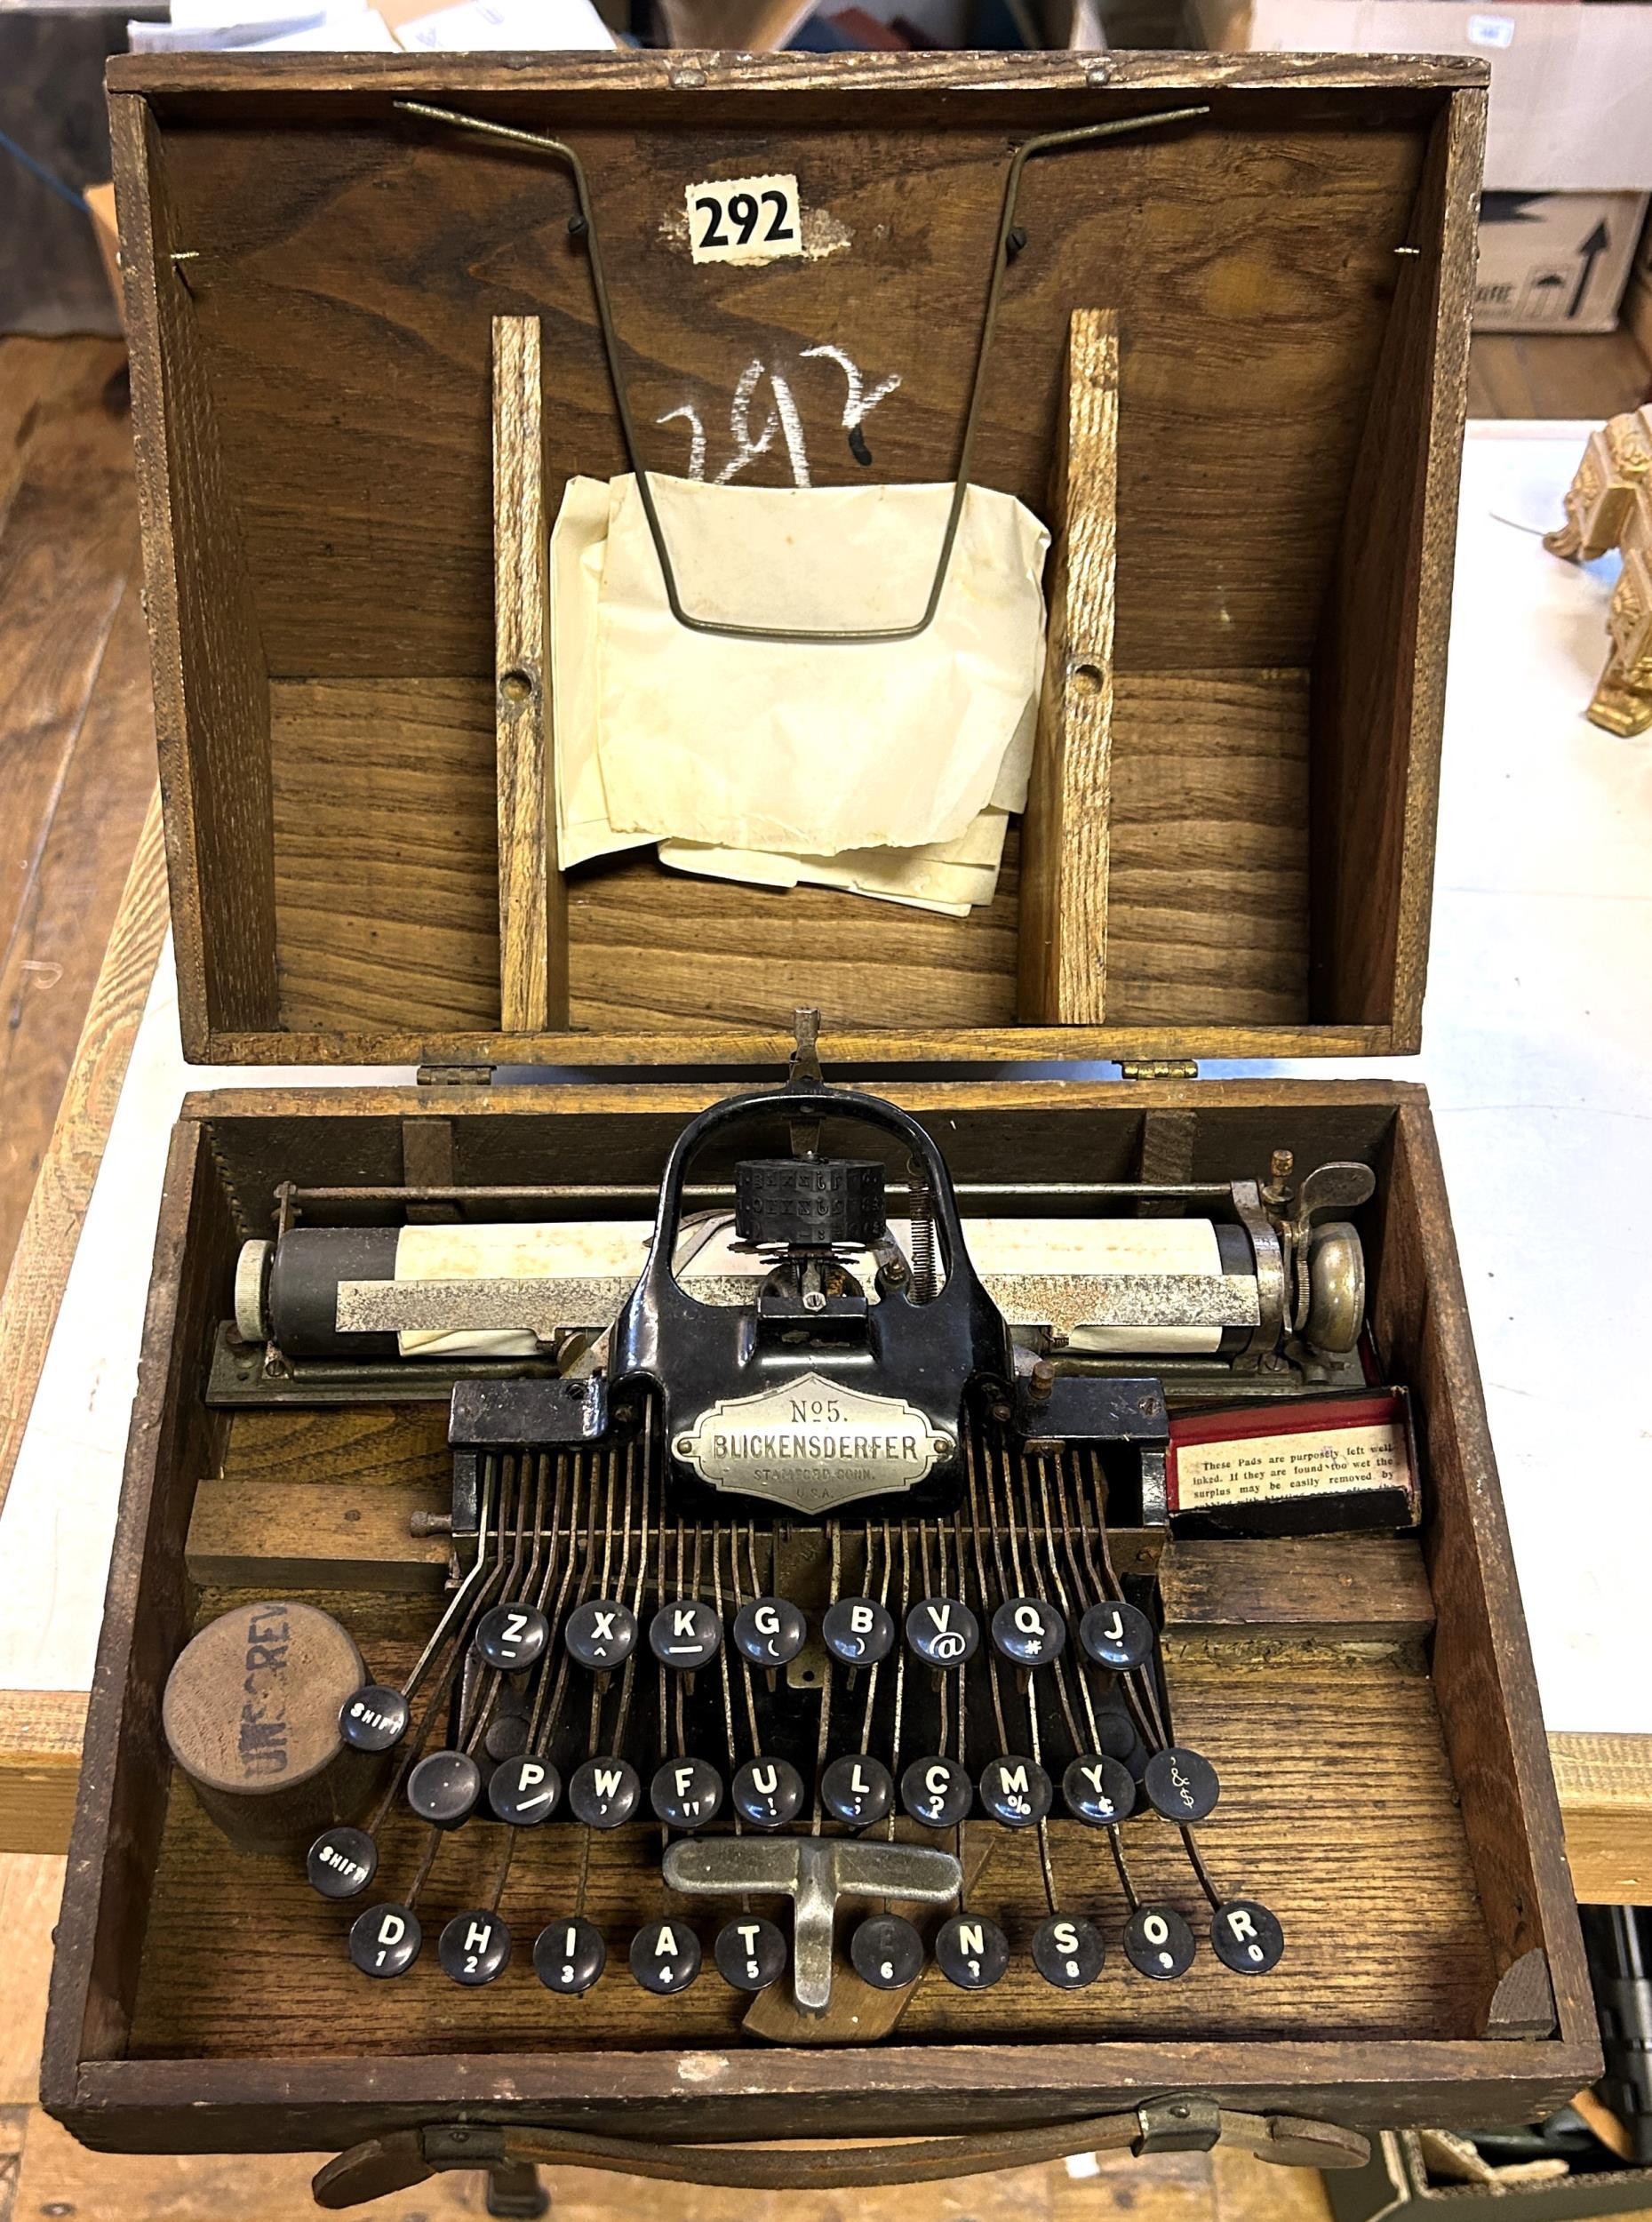 A late 19th/early 20th Blickensderfer No 5 typewriter, in a wooden case - Image 2 of 4